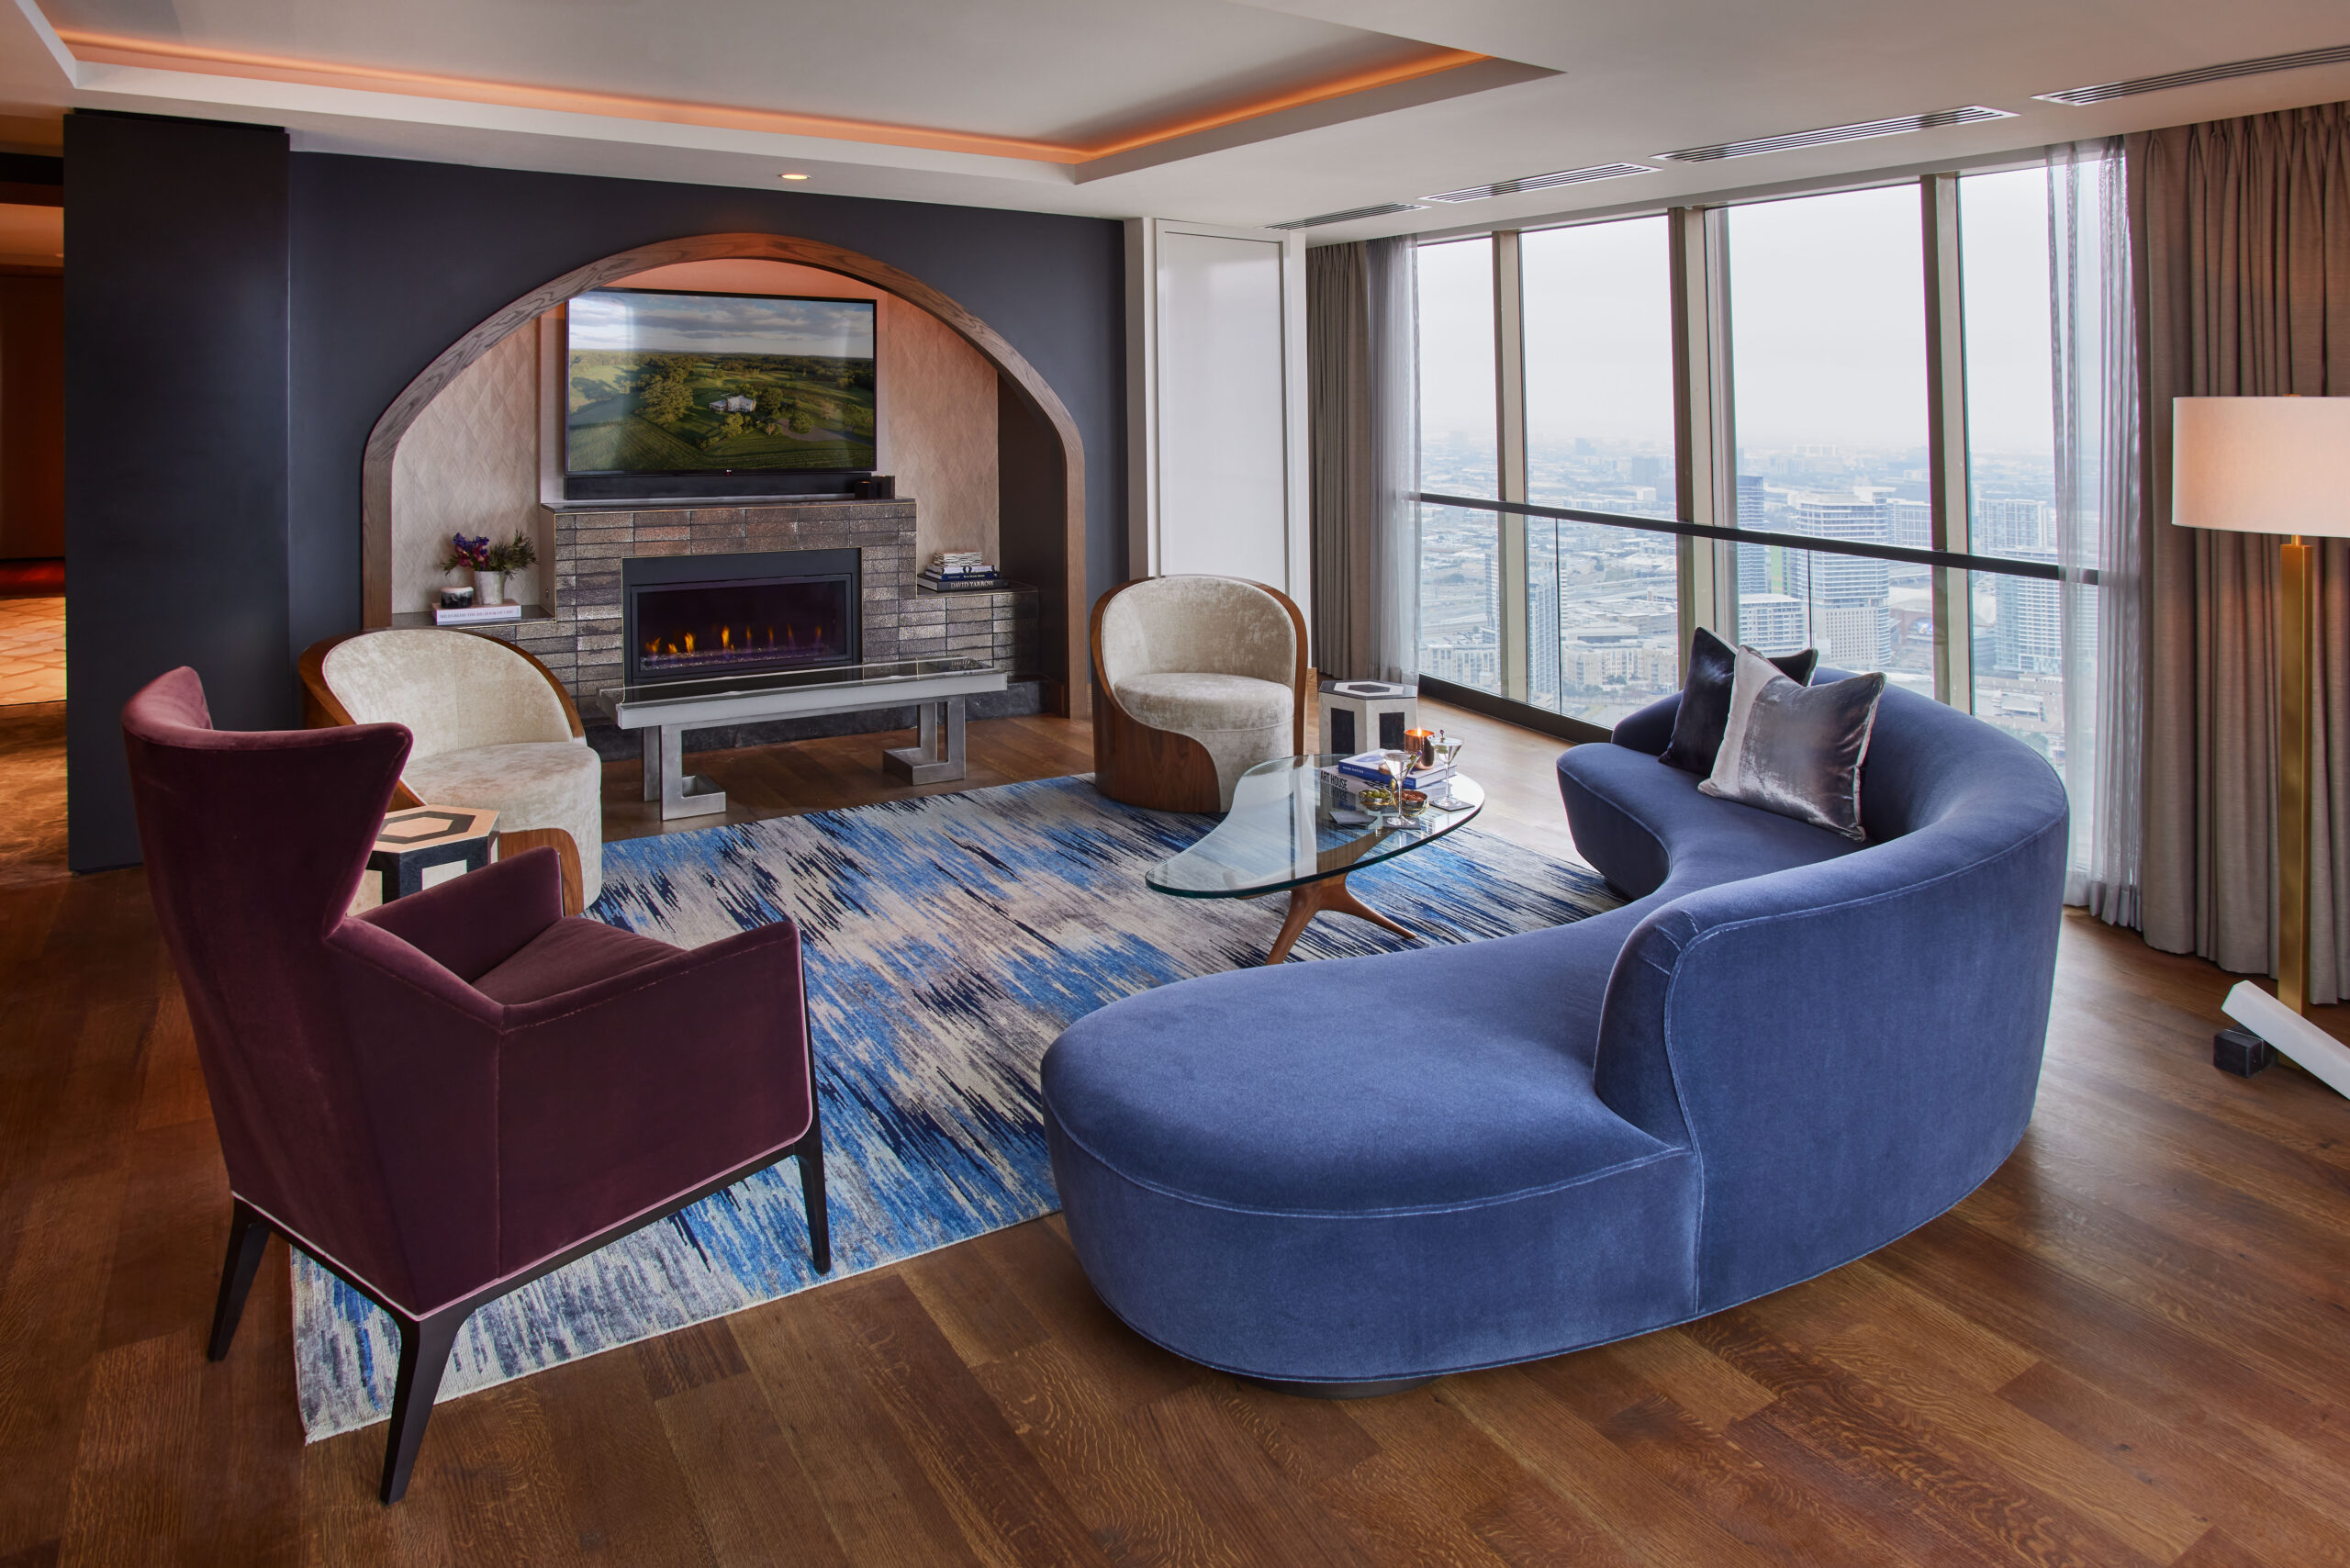 Look Inside the Most Expensive Hotel Penthouse Suite in Downtown Dallas